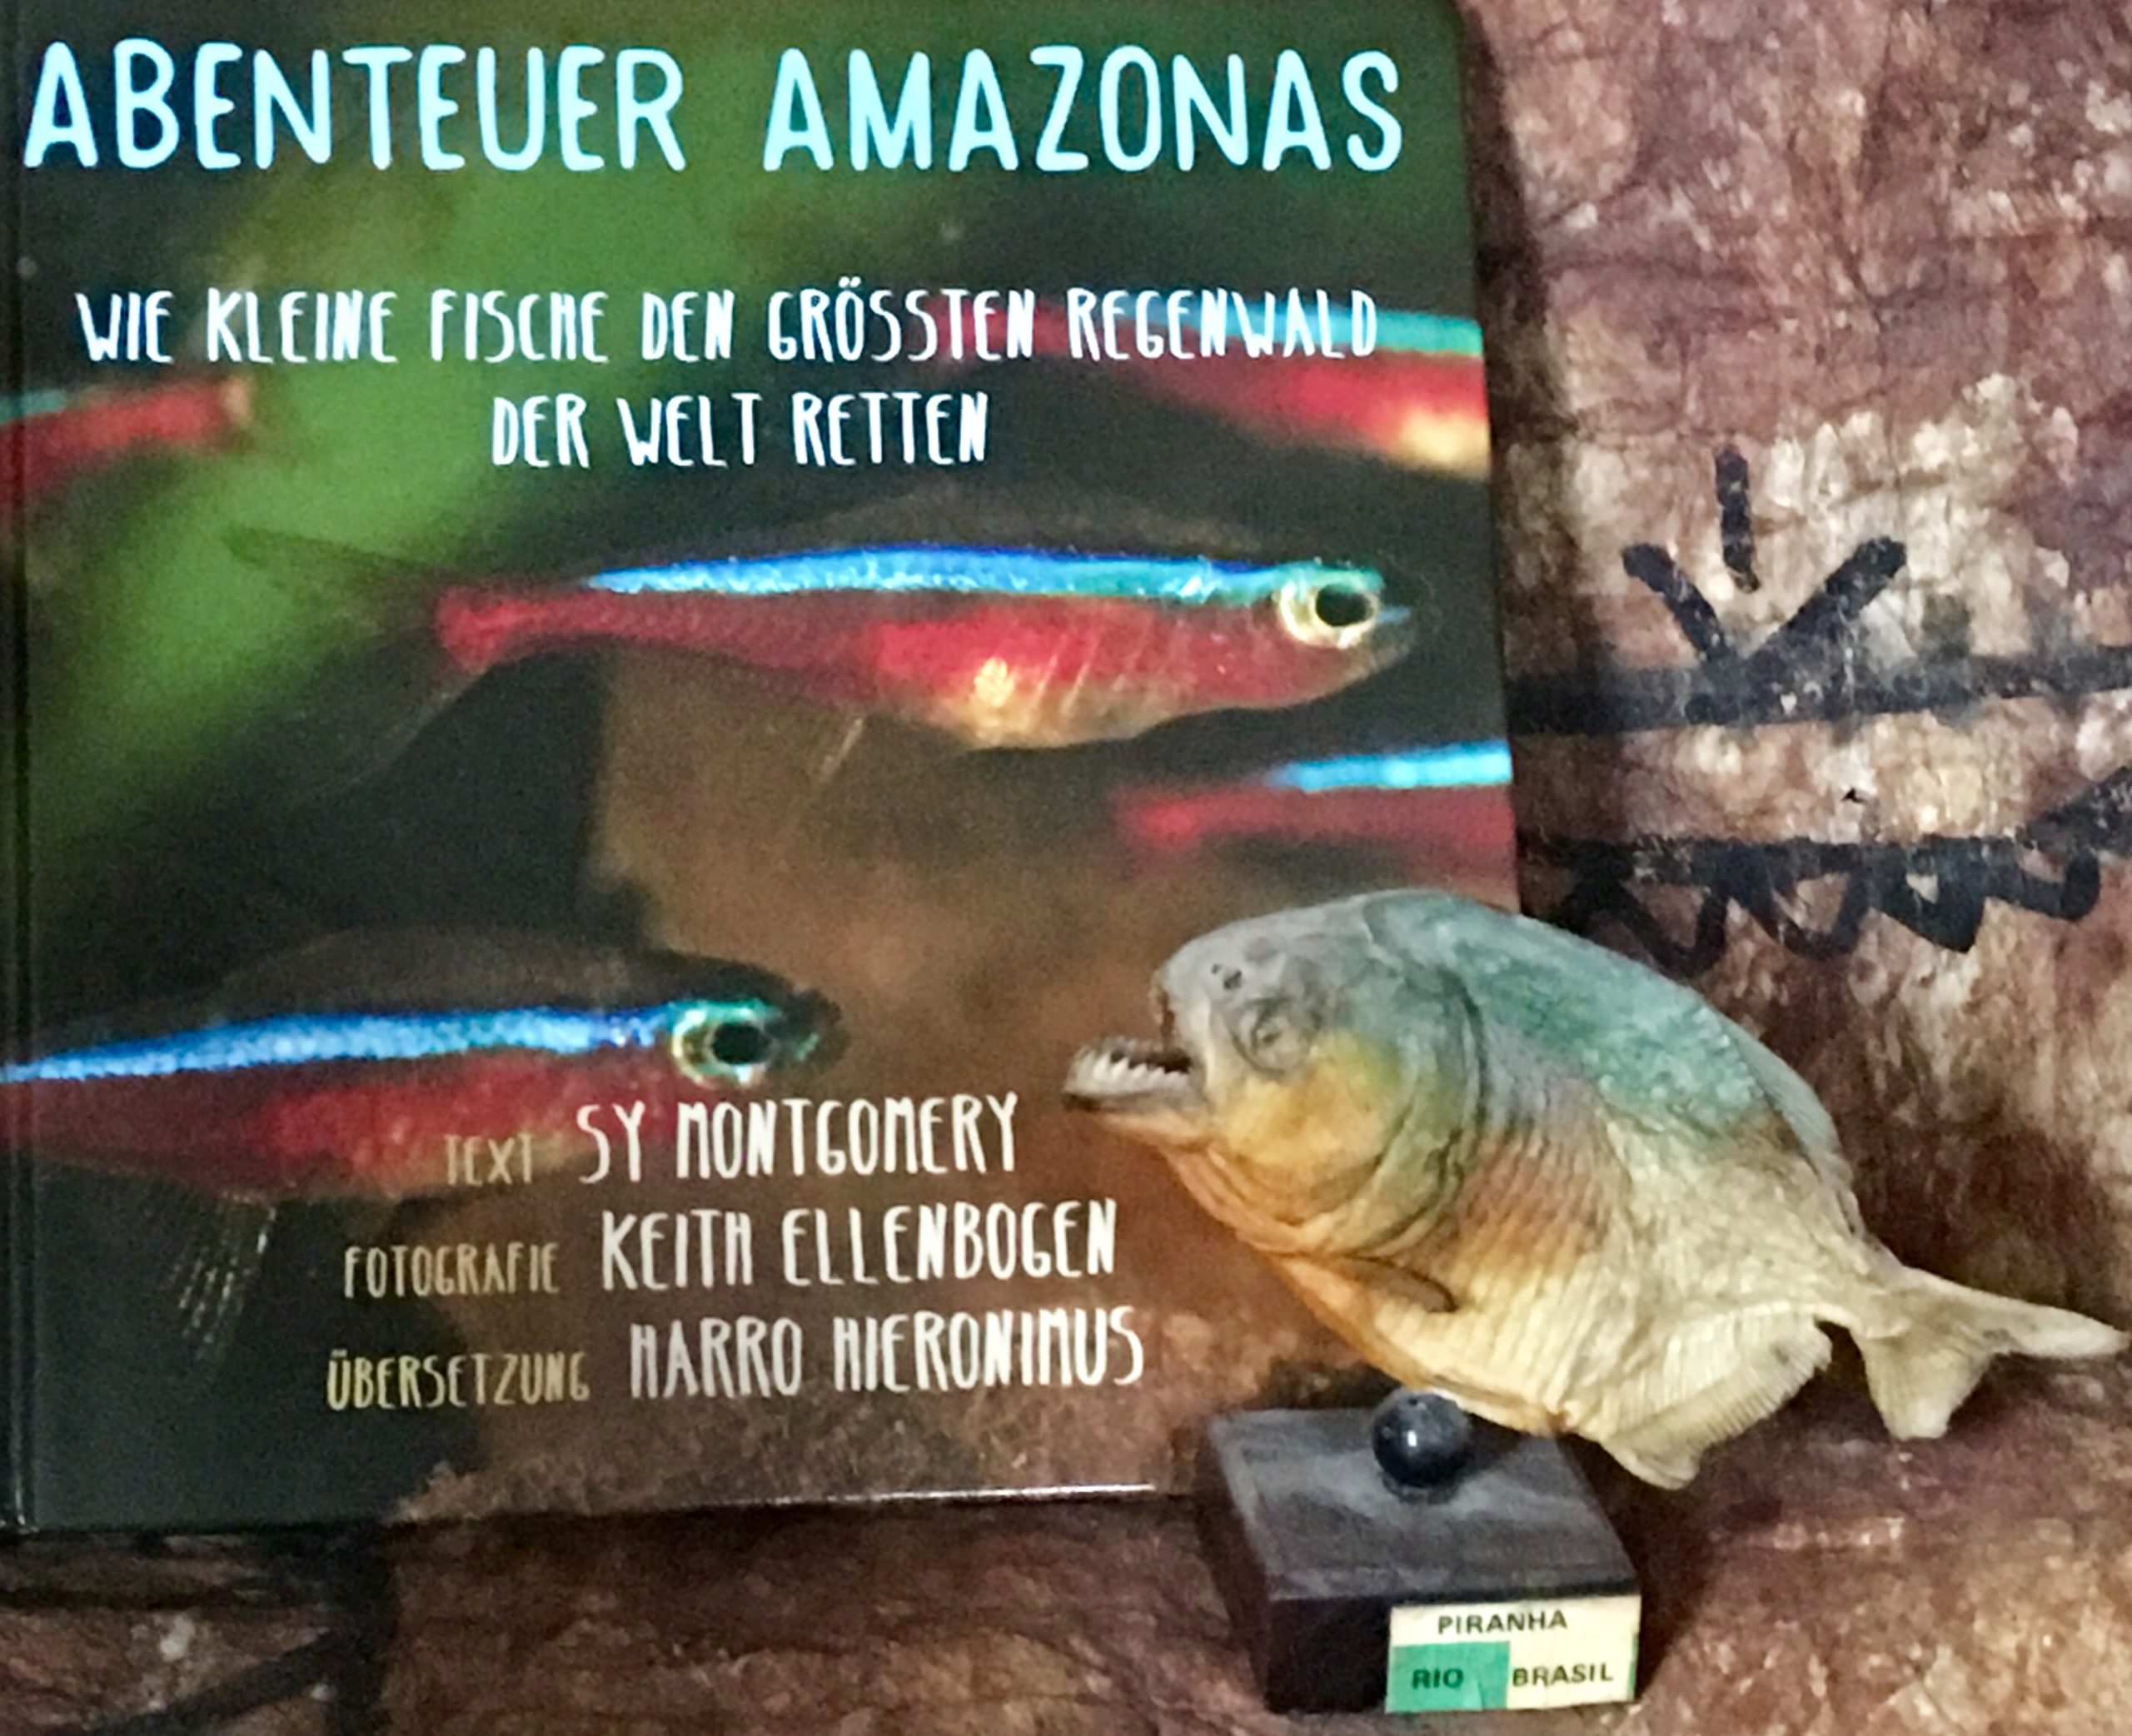 The German edition of Amazon Adventure is out -- shown here with a jaunty piranha.